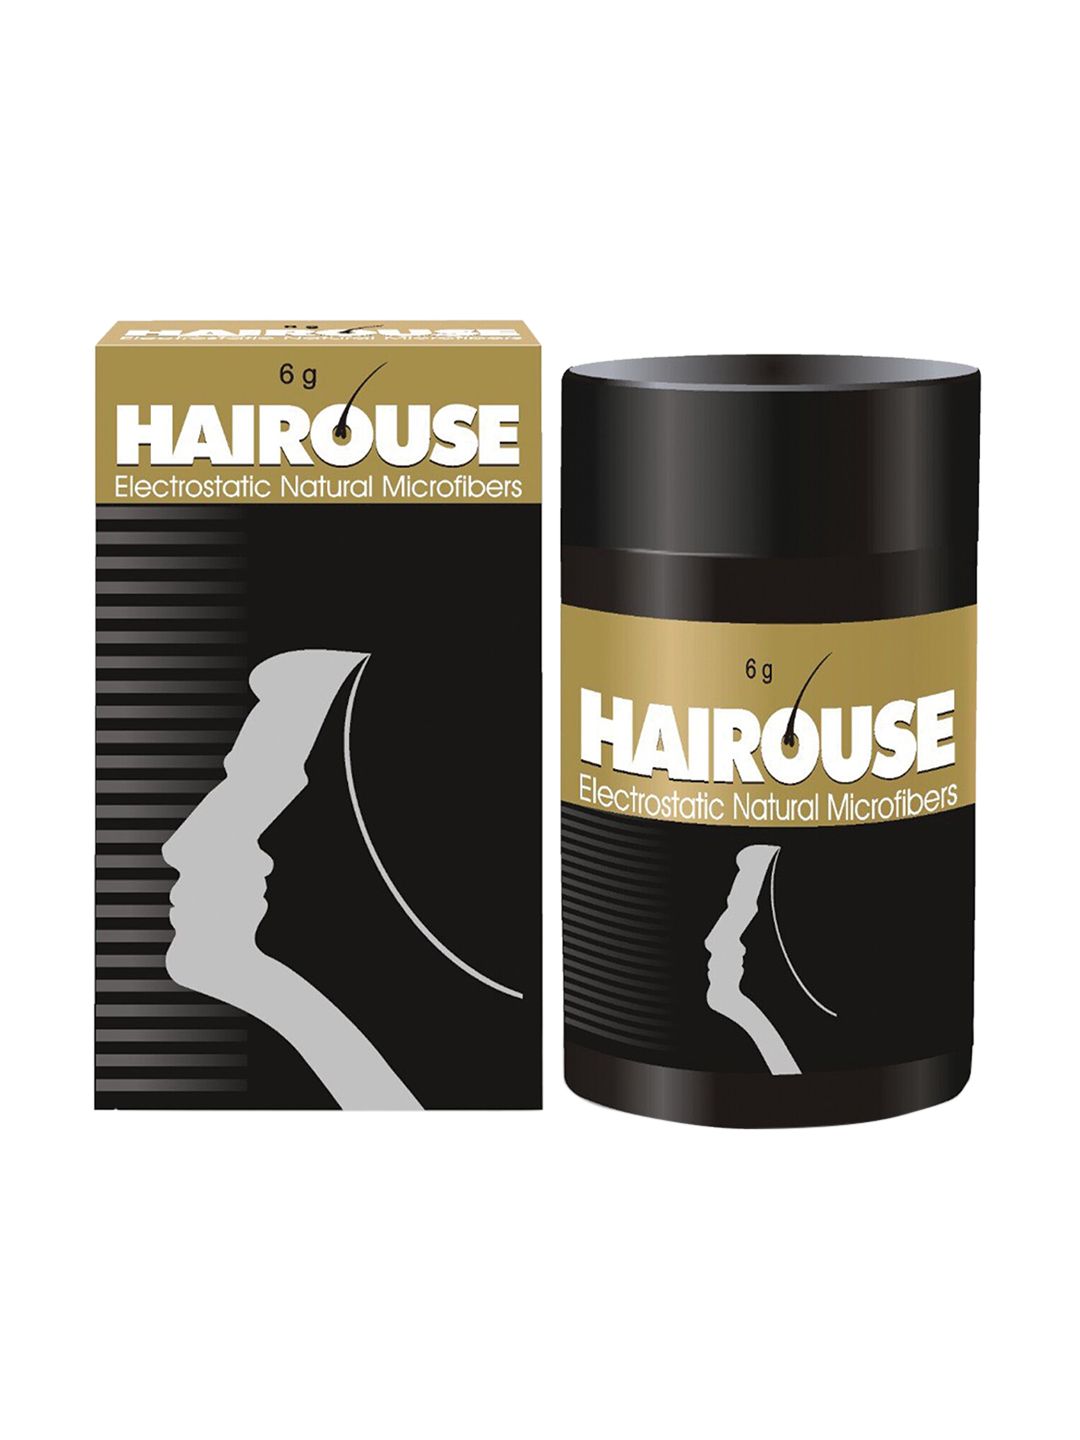 HAIROUSE Unisex Natural Hair Building Microfibers Price in India